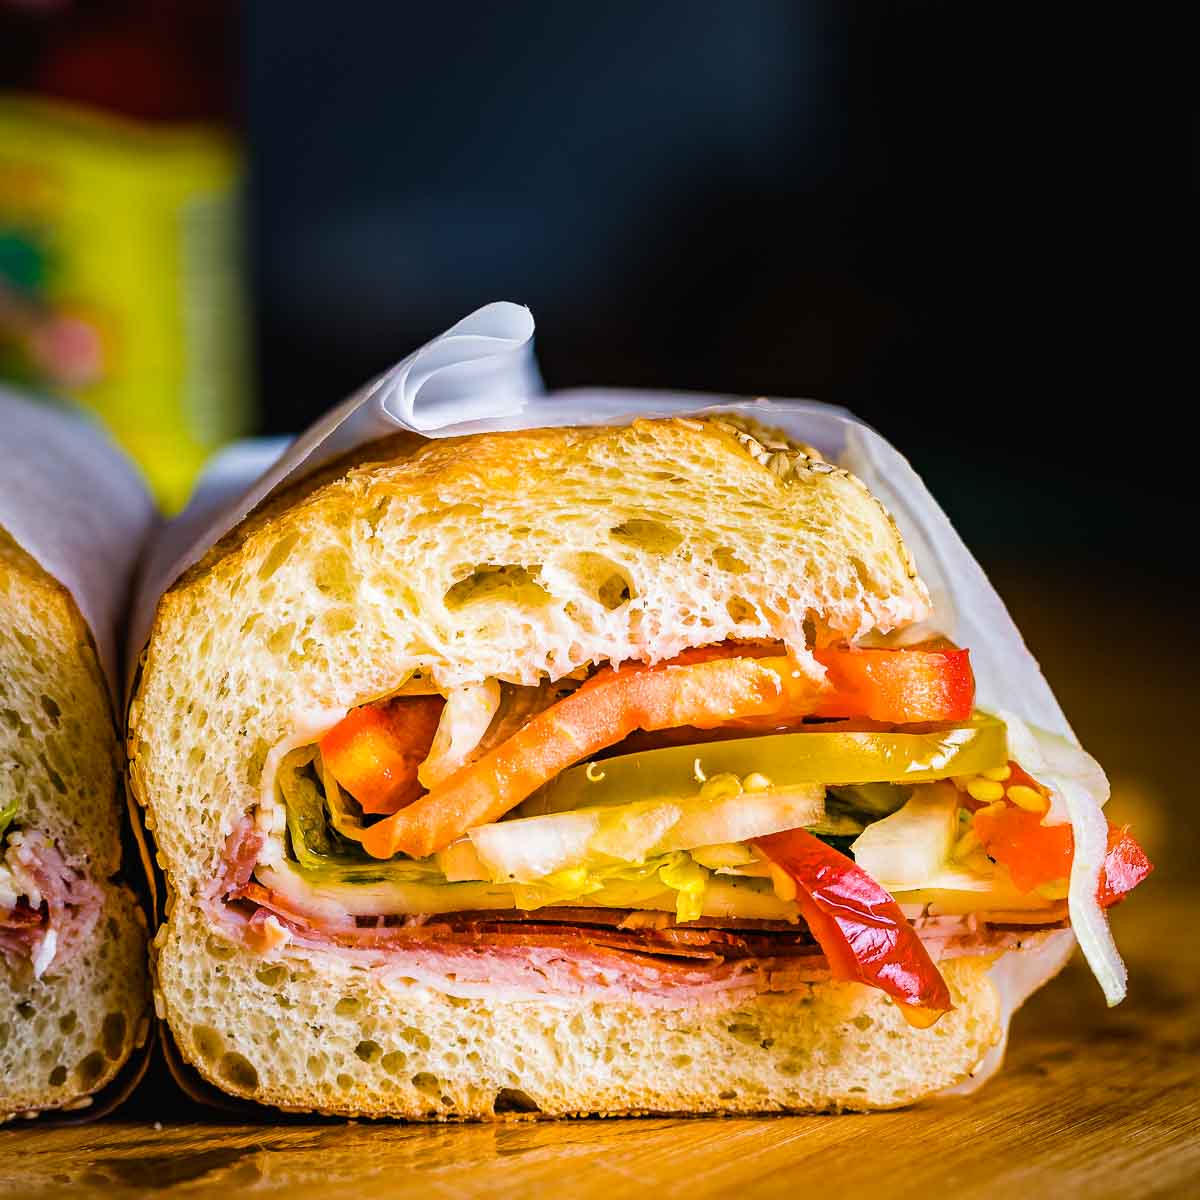 America's Largest Sandwich Chain Is Adding Seven New Subs To the